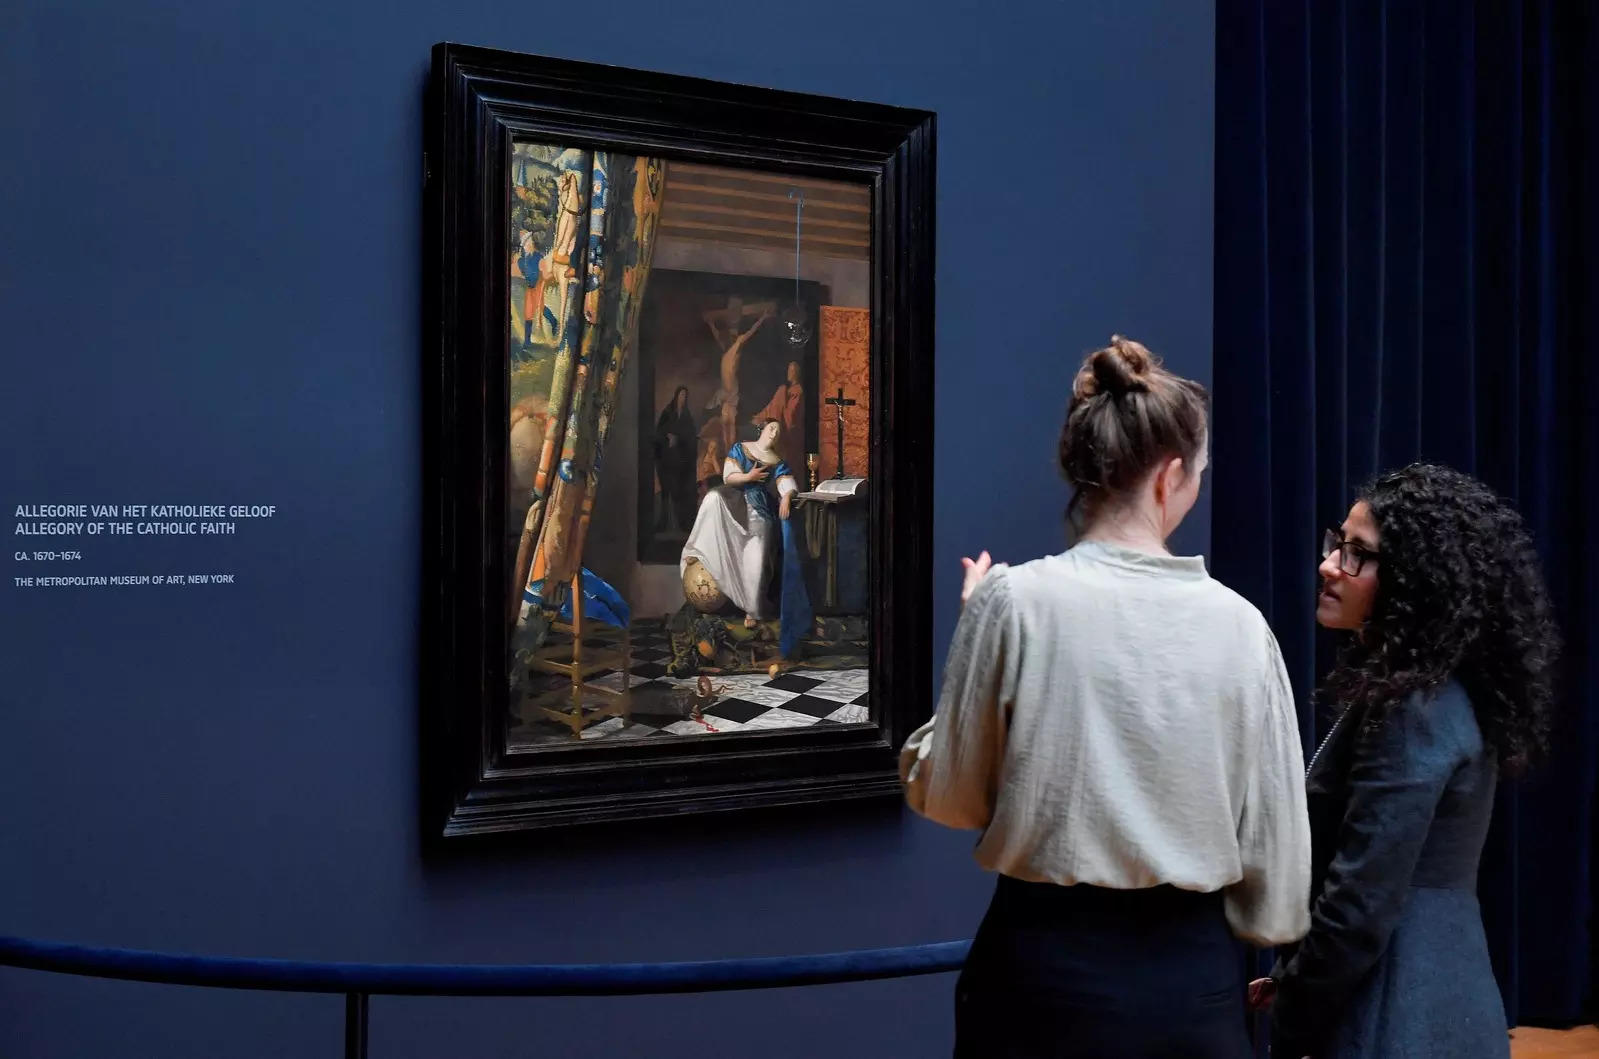 28 Vermeer masterpieces from around the world on display at Amsterdam